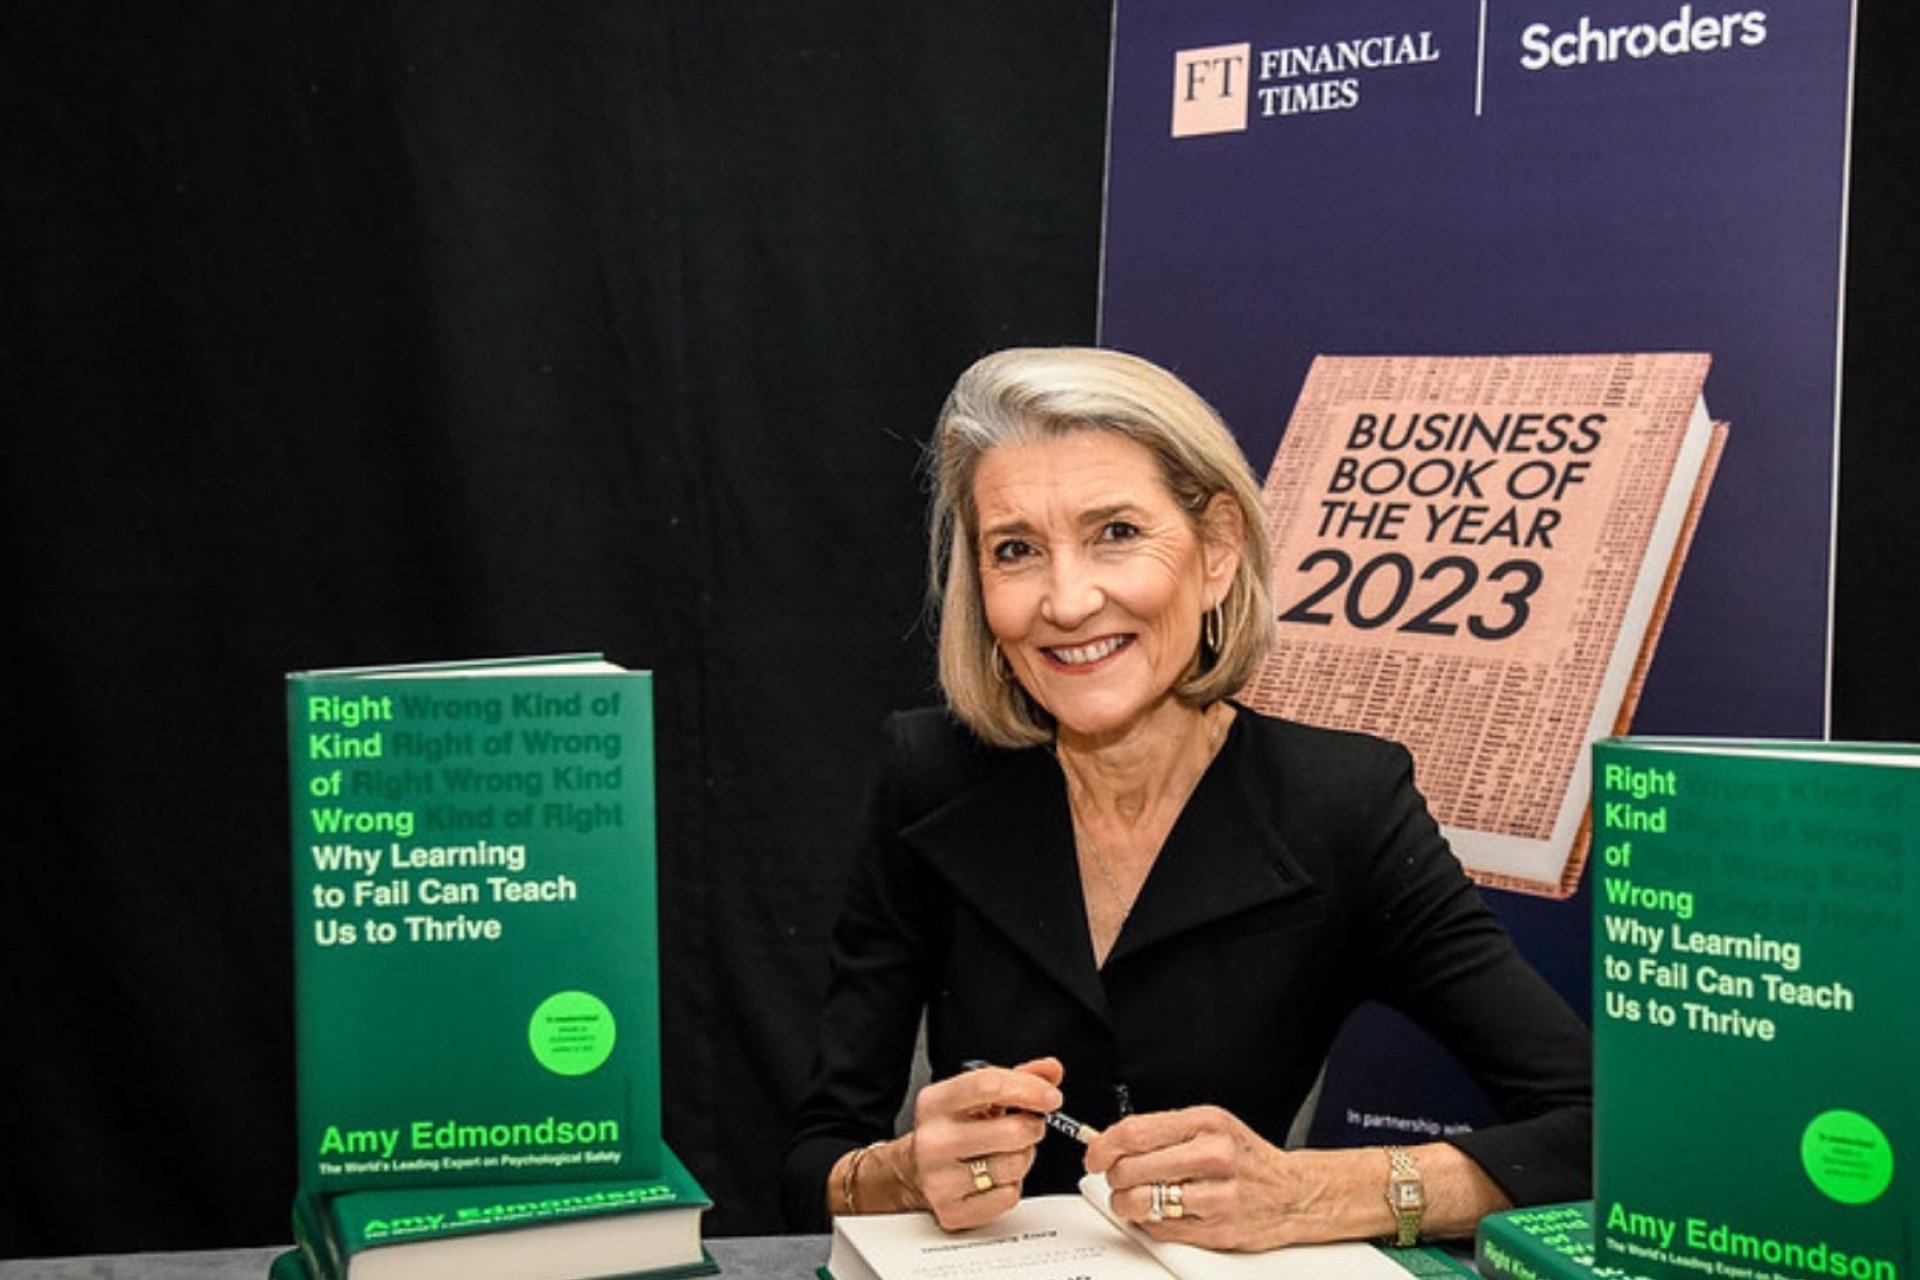 Right Kind of Wrong: Why Learning to Fail Can Teach Us to Thrive Takes the 2023 FT and Schroders Business Book of the Year Award